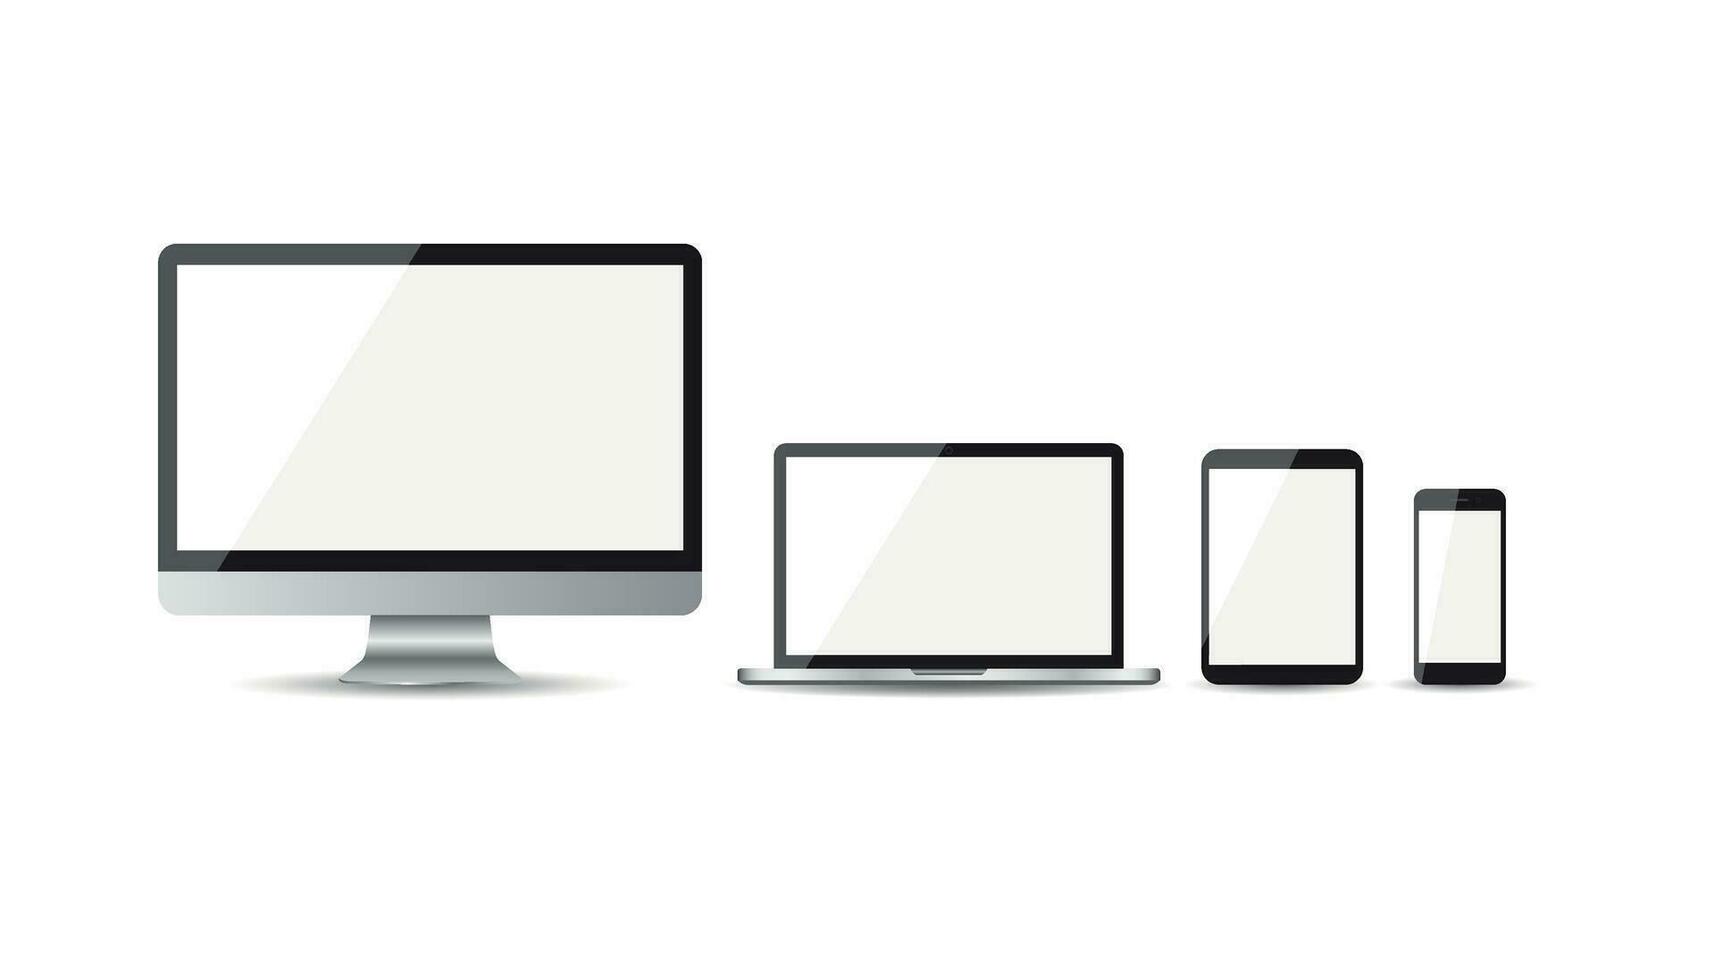 Realistic device flat Icon smartphone, tablet, laptop and desktop computer. Vector illustration on white background